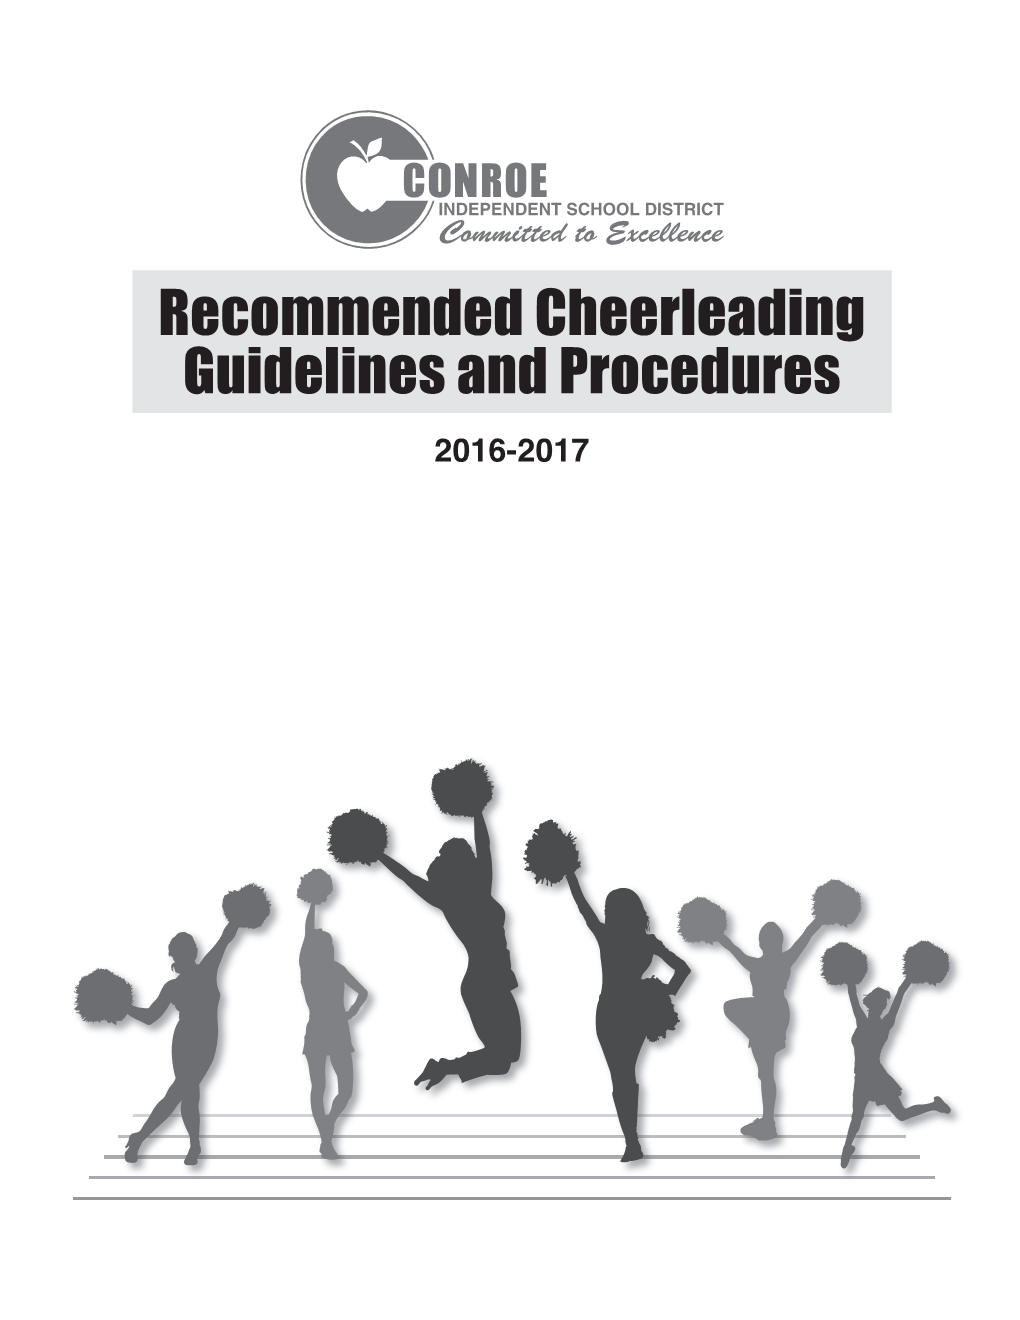 Recommended Cheerleading Guidelines and Procedures